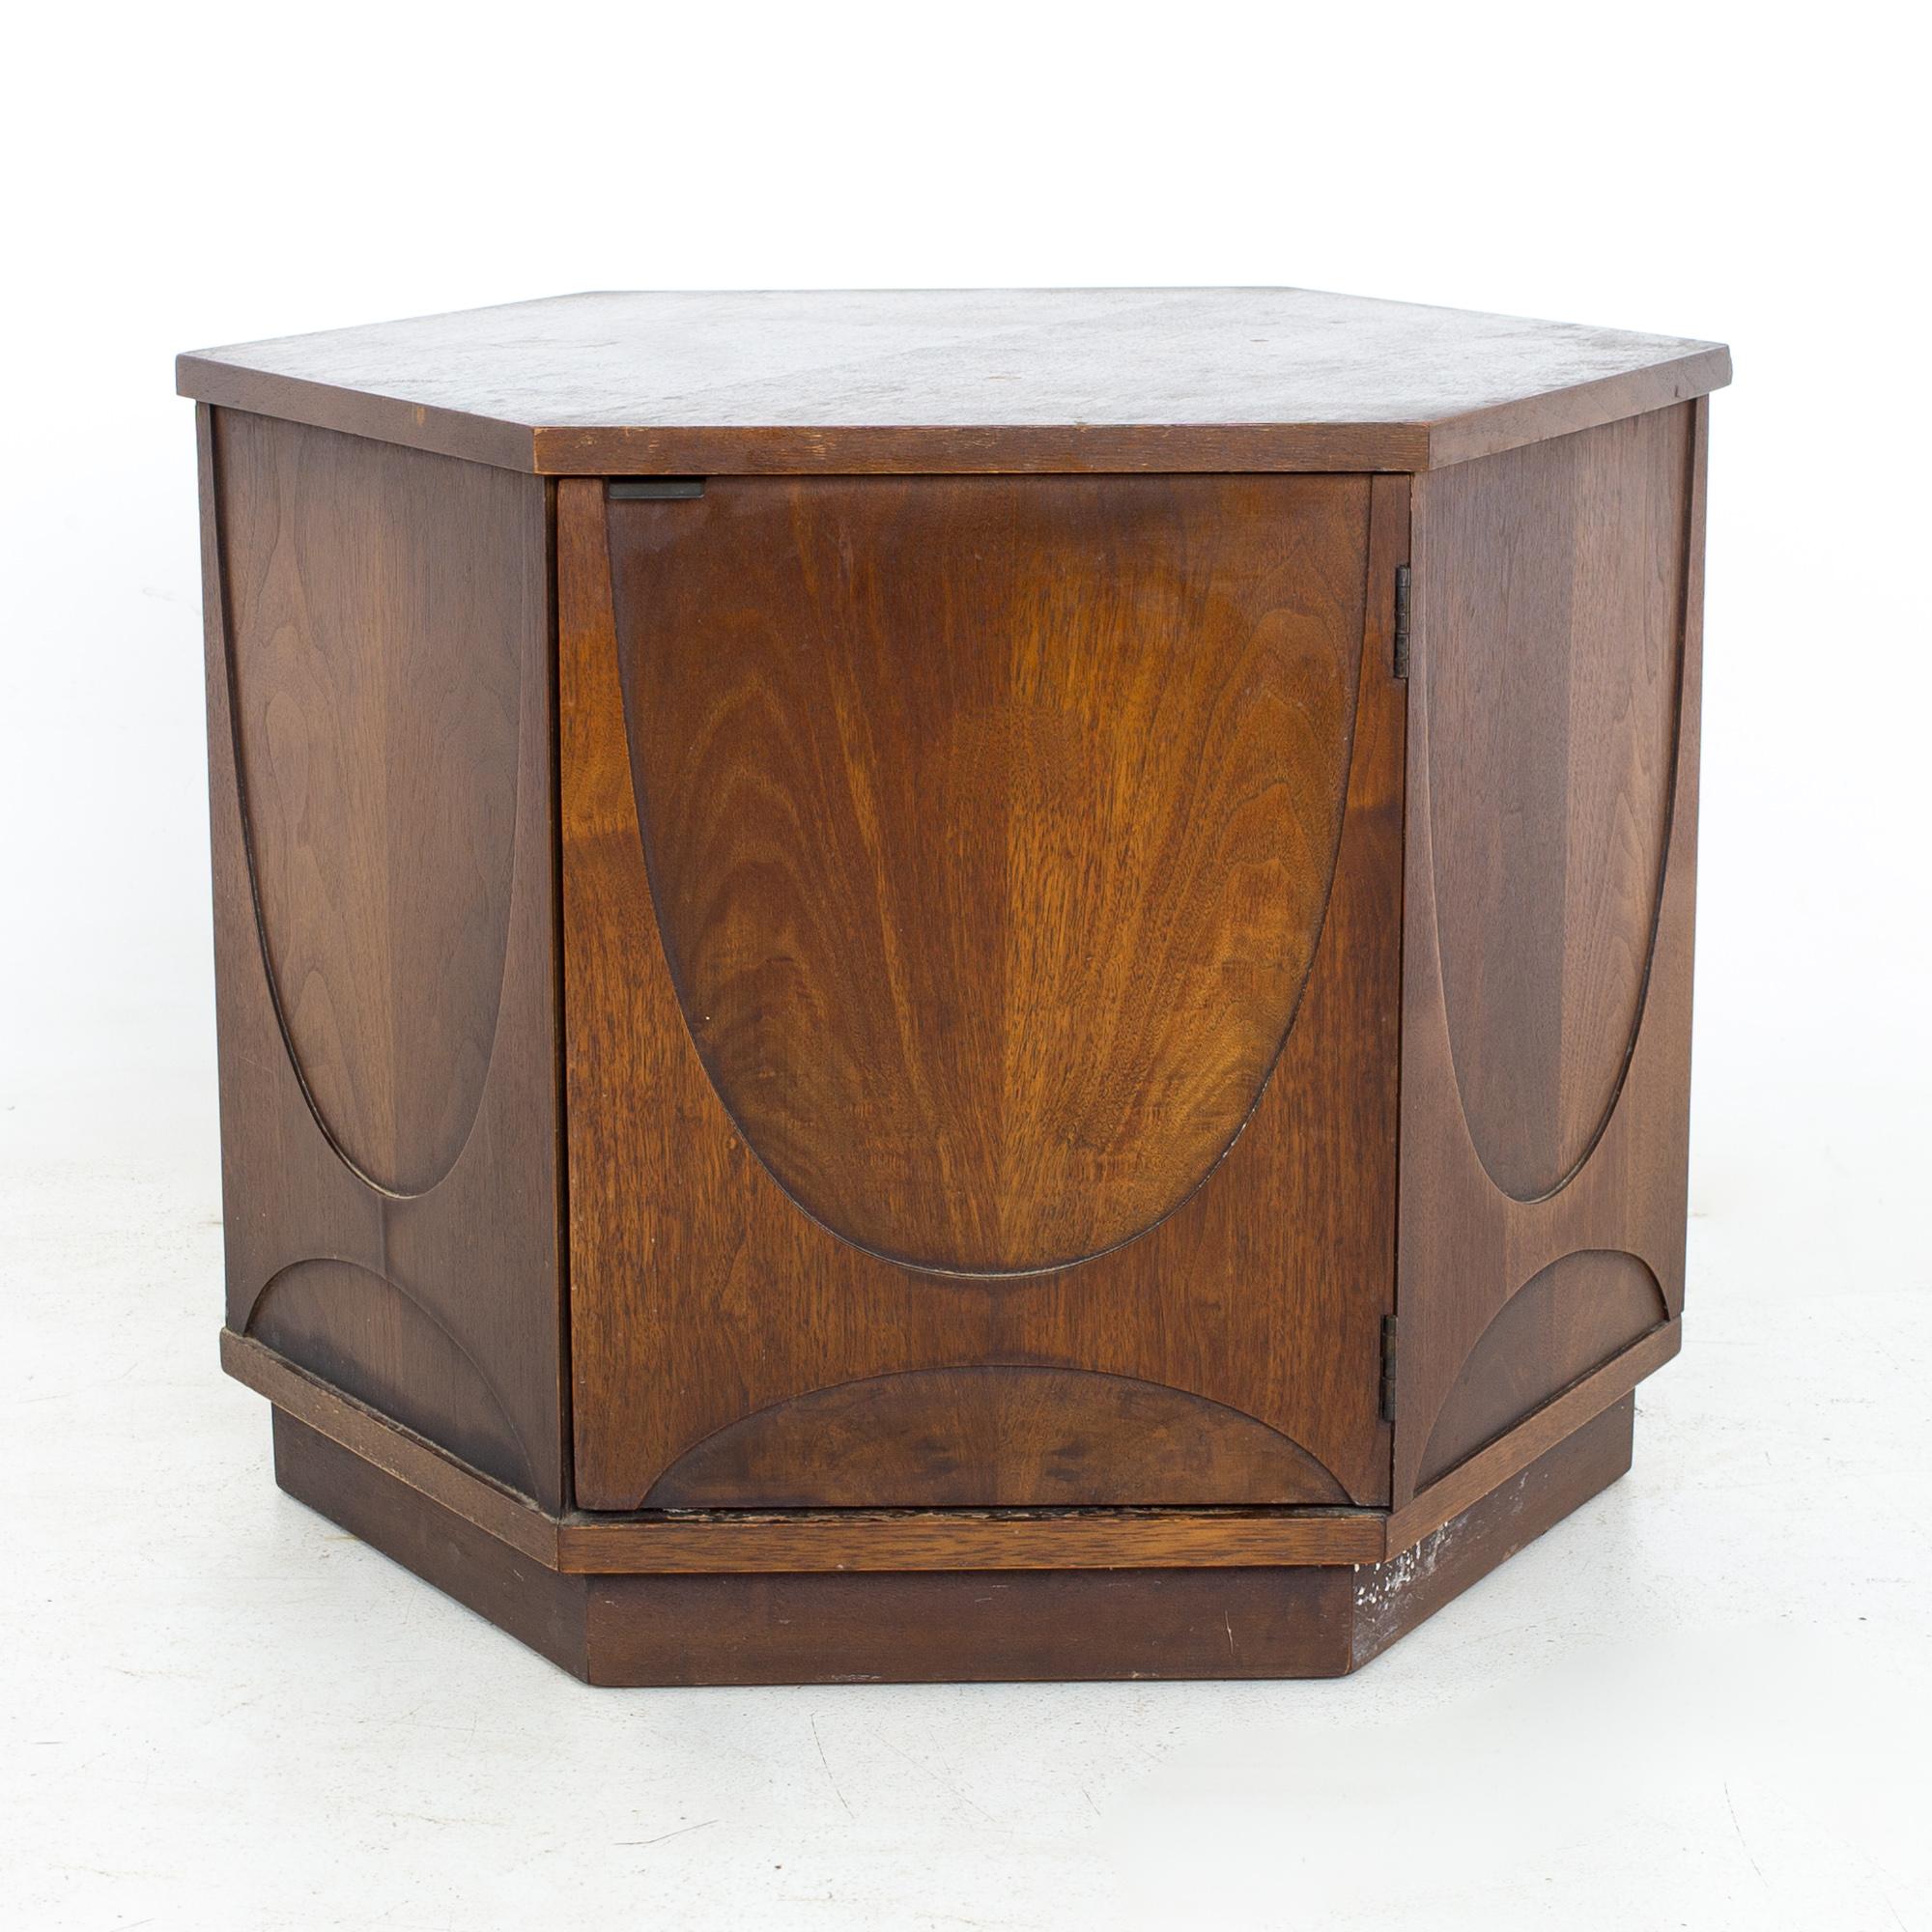 Broyhill Brasilia mid century hexagonal side end storage table
End table measures: 28 wide x 24.25 deep x 21.25 inches high

All pieces of furniture can be had in what we call restored vintage condition. That means the piece is restored upon